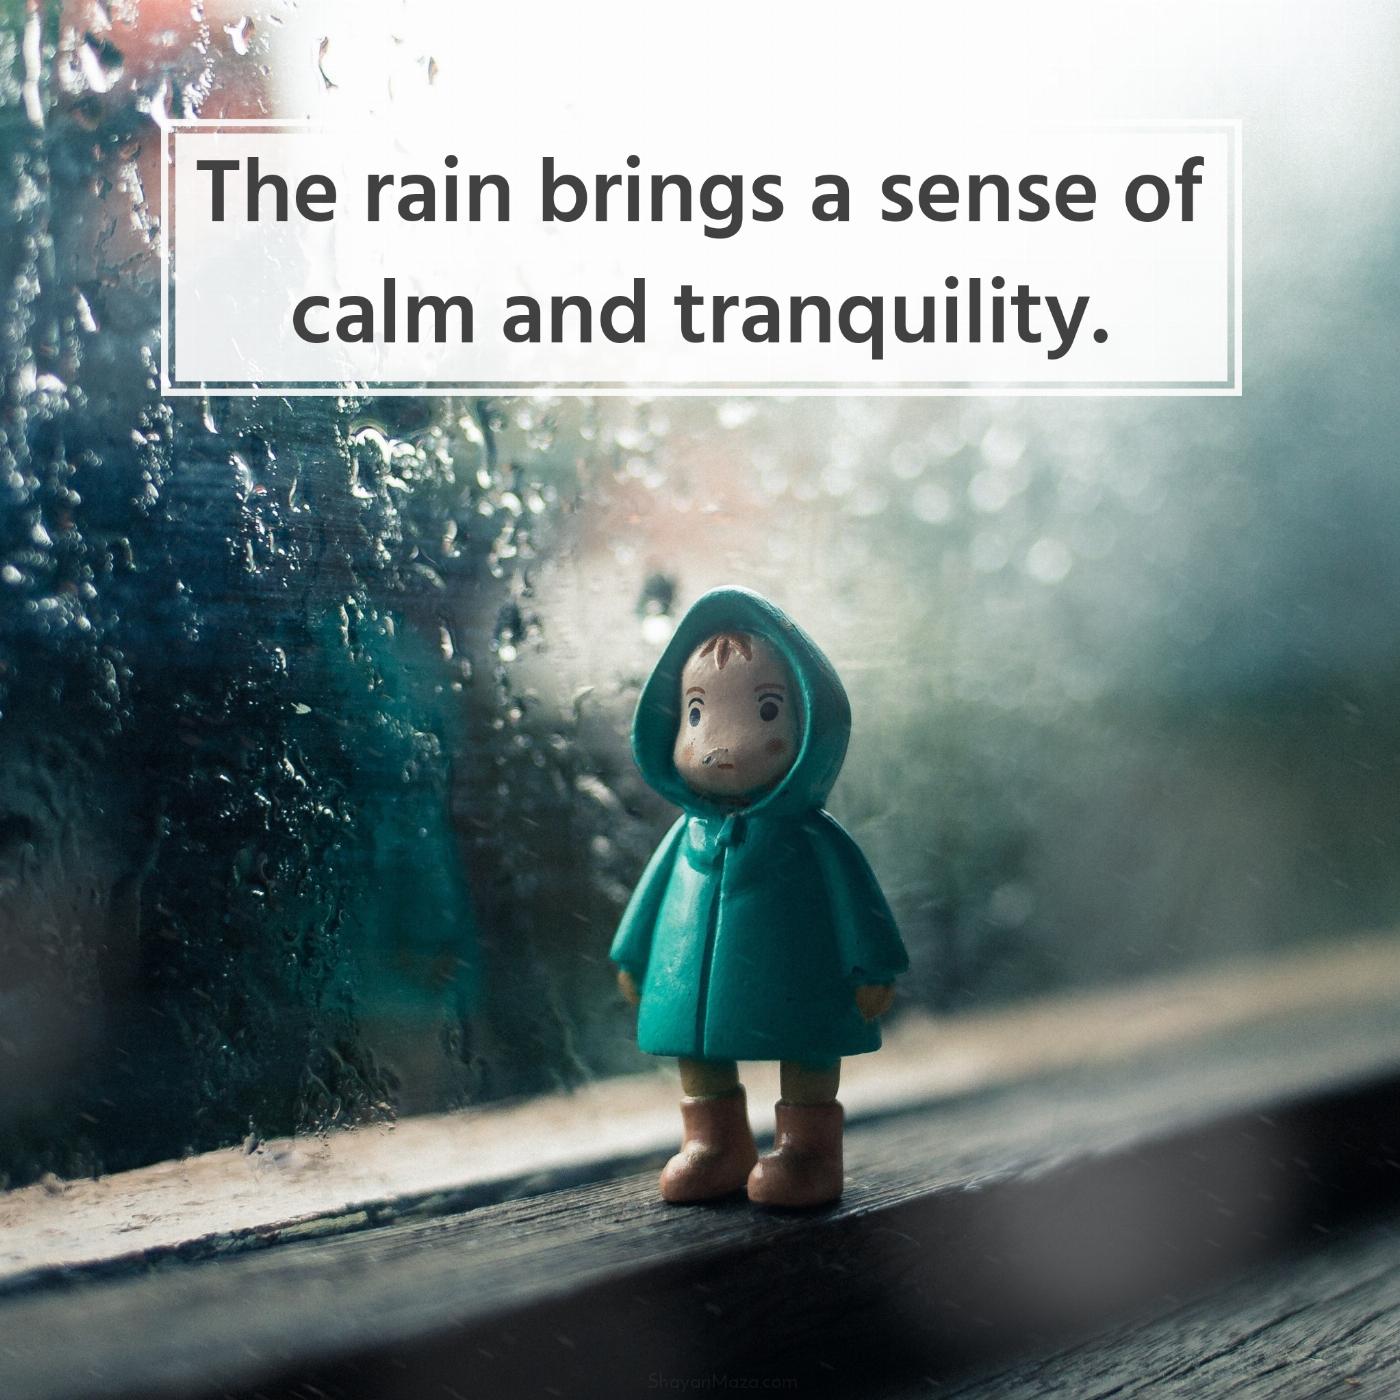 The rain brings a sense of calm and tranquility